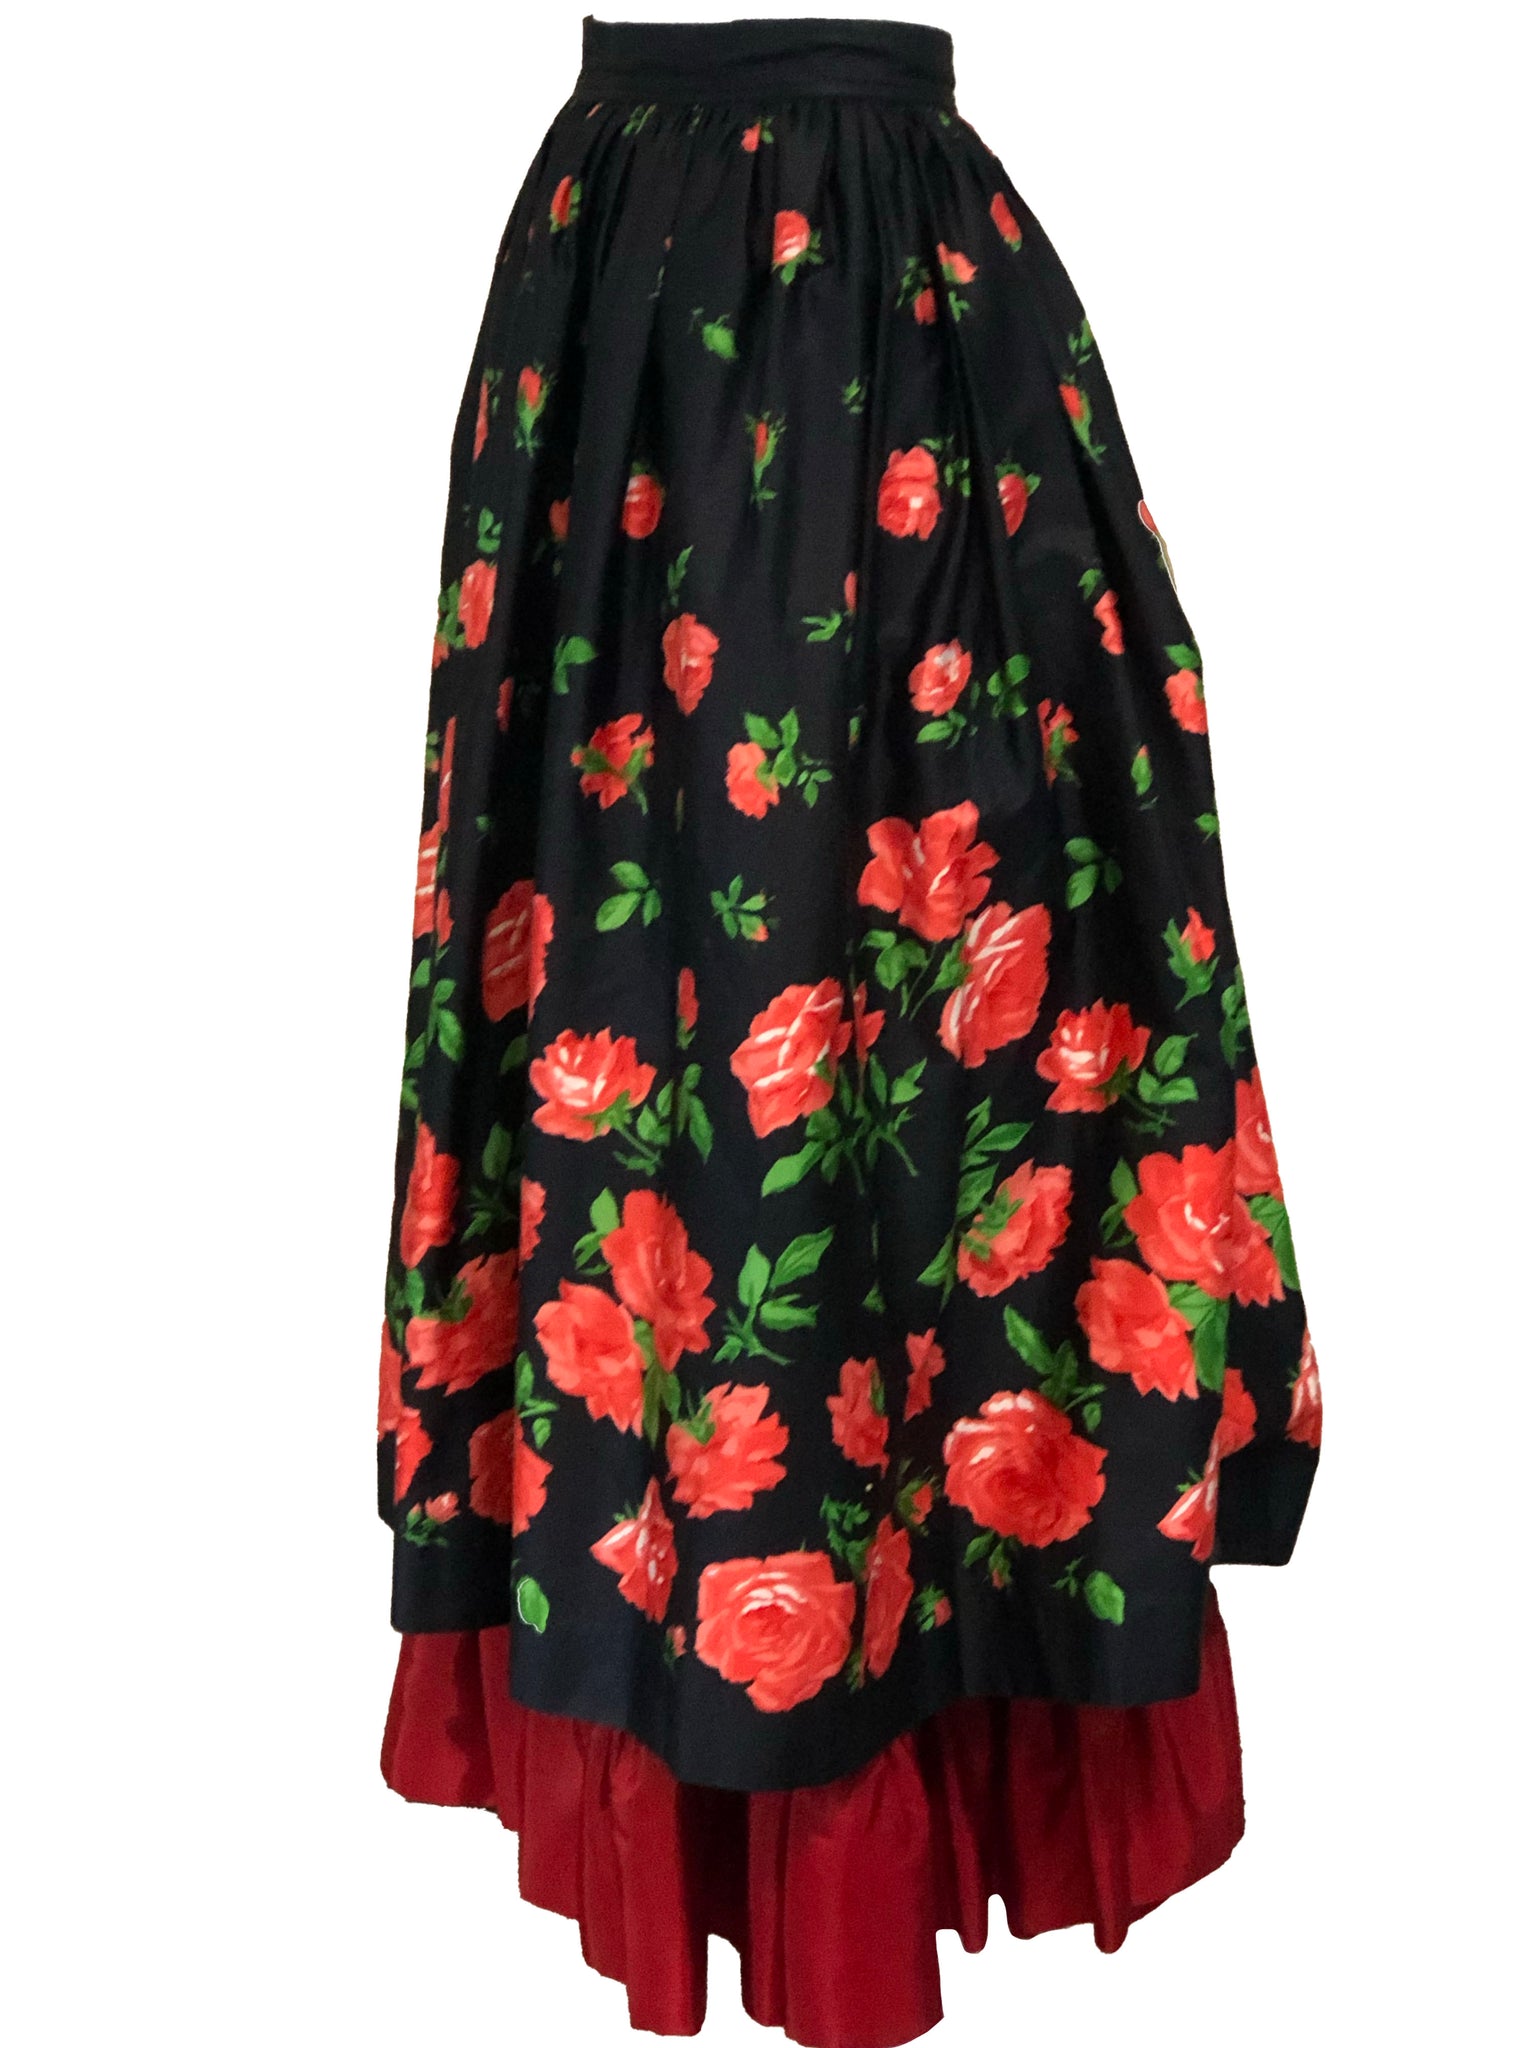 Saint Laurent Rive Gauche Layered Peasant skirt in Black and Red Floral  SIDE 2 of 4